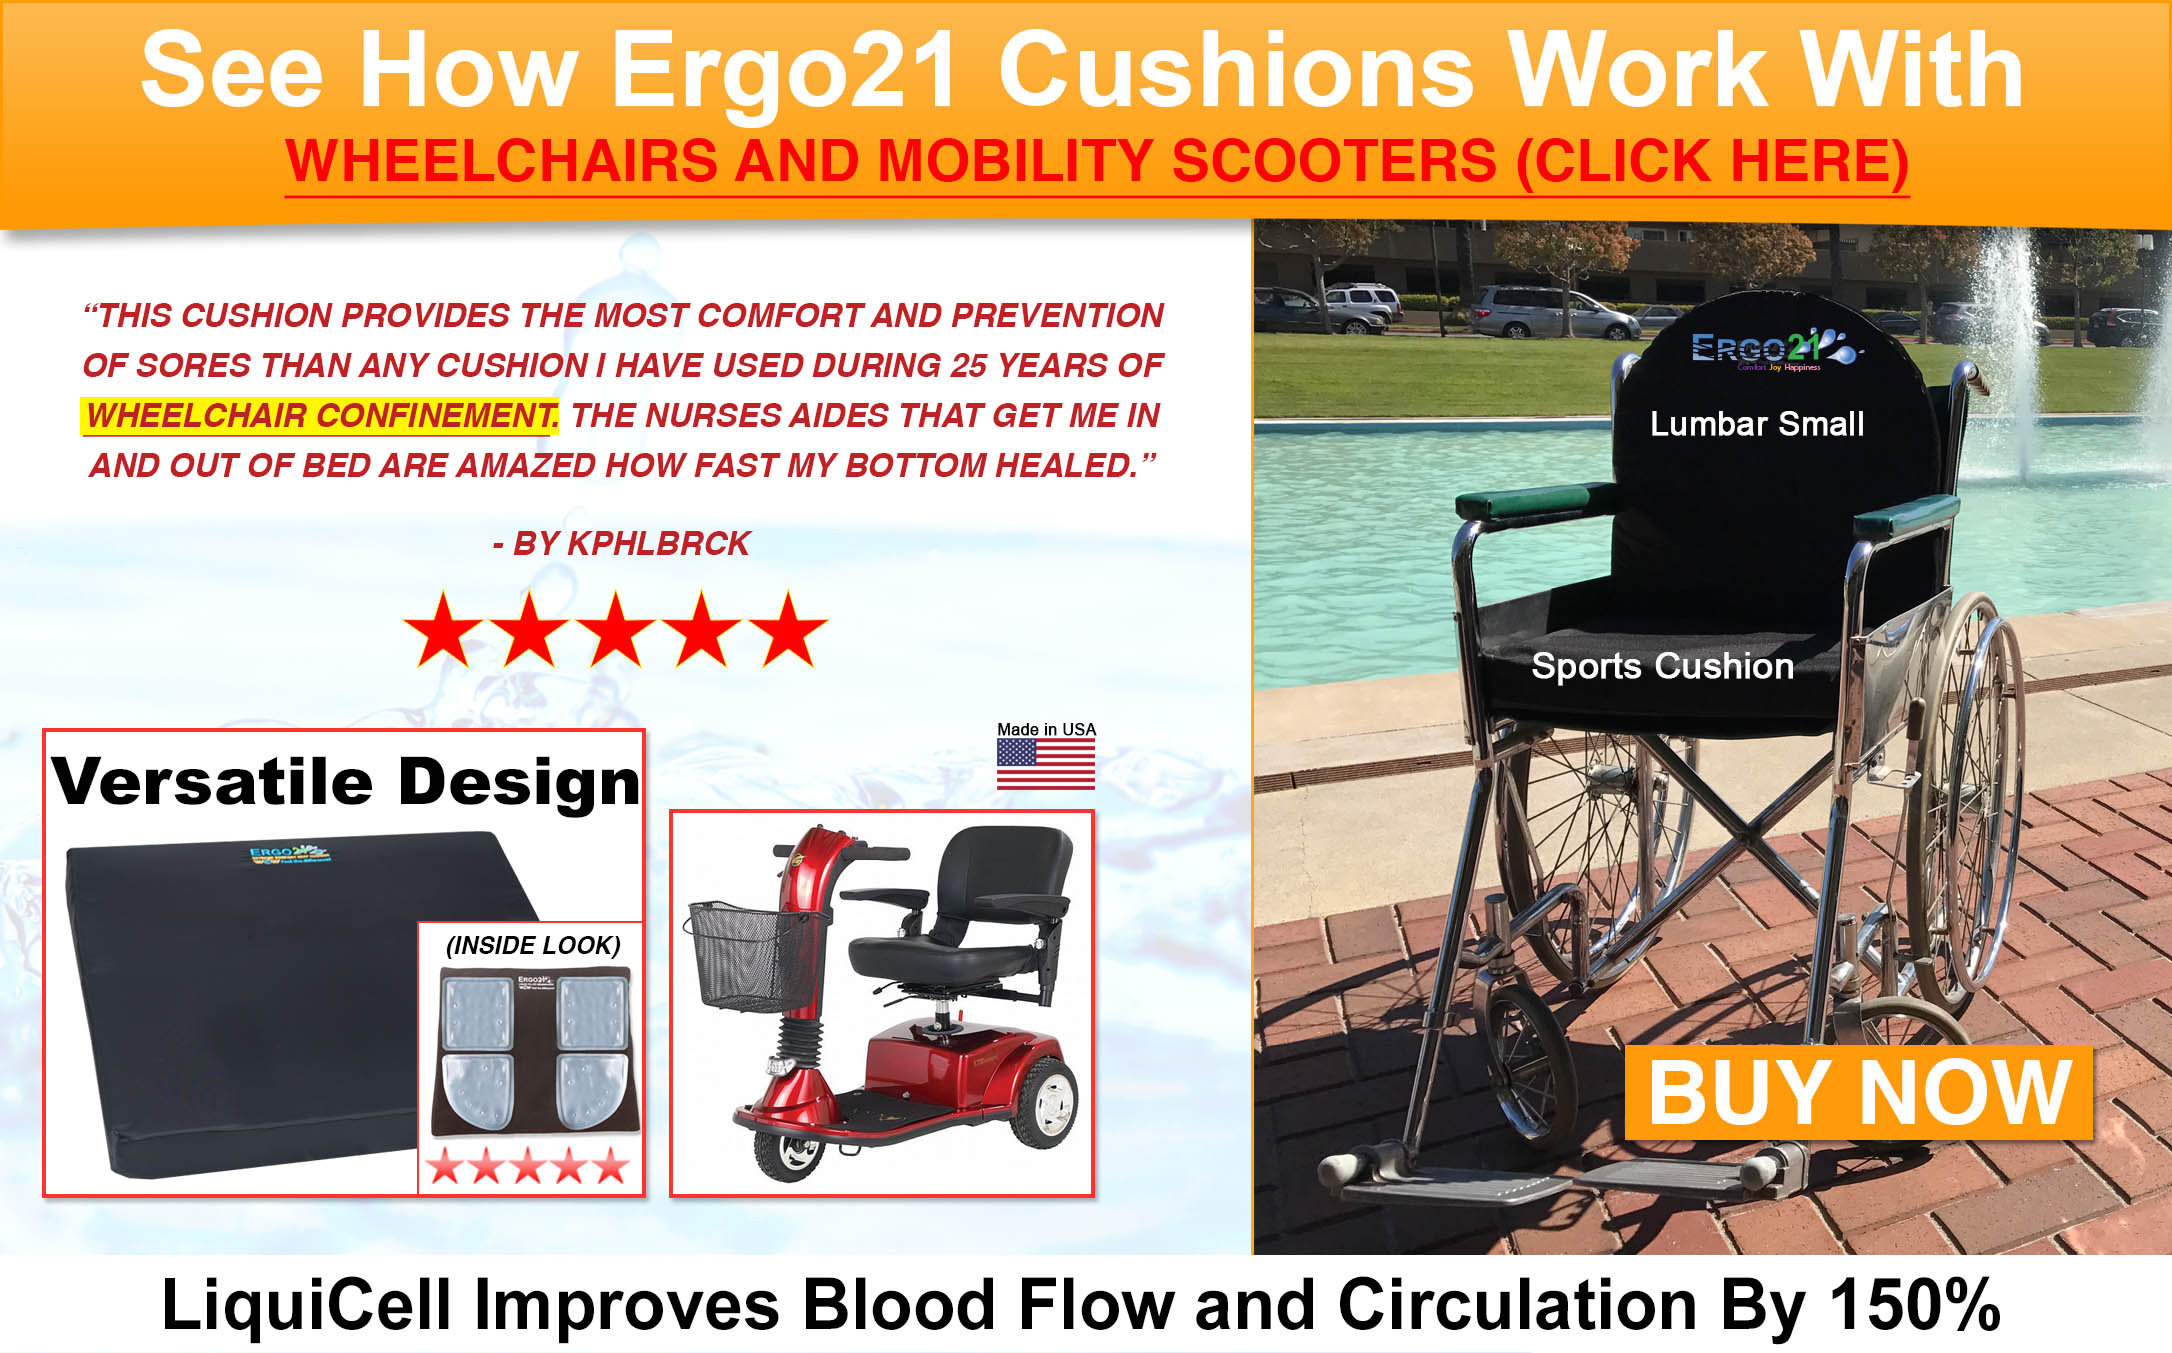 How Ergo21 Cushions Work With Wheelchairs and Mobility Scooters